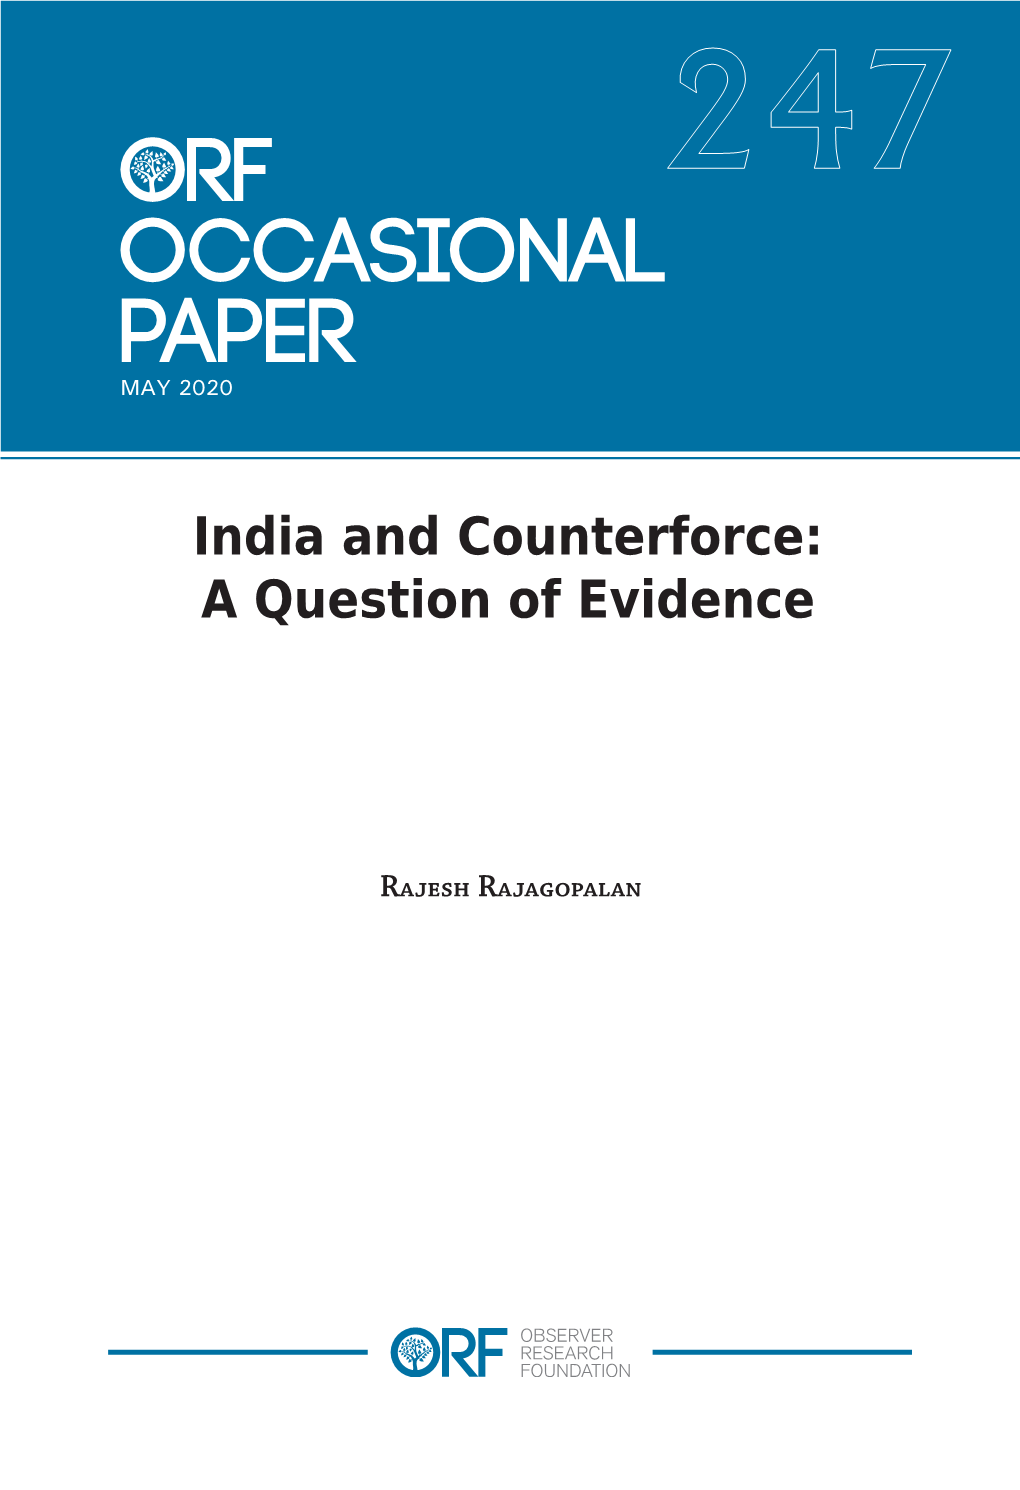 India and Counterforce: a Question of Evidence